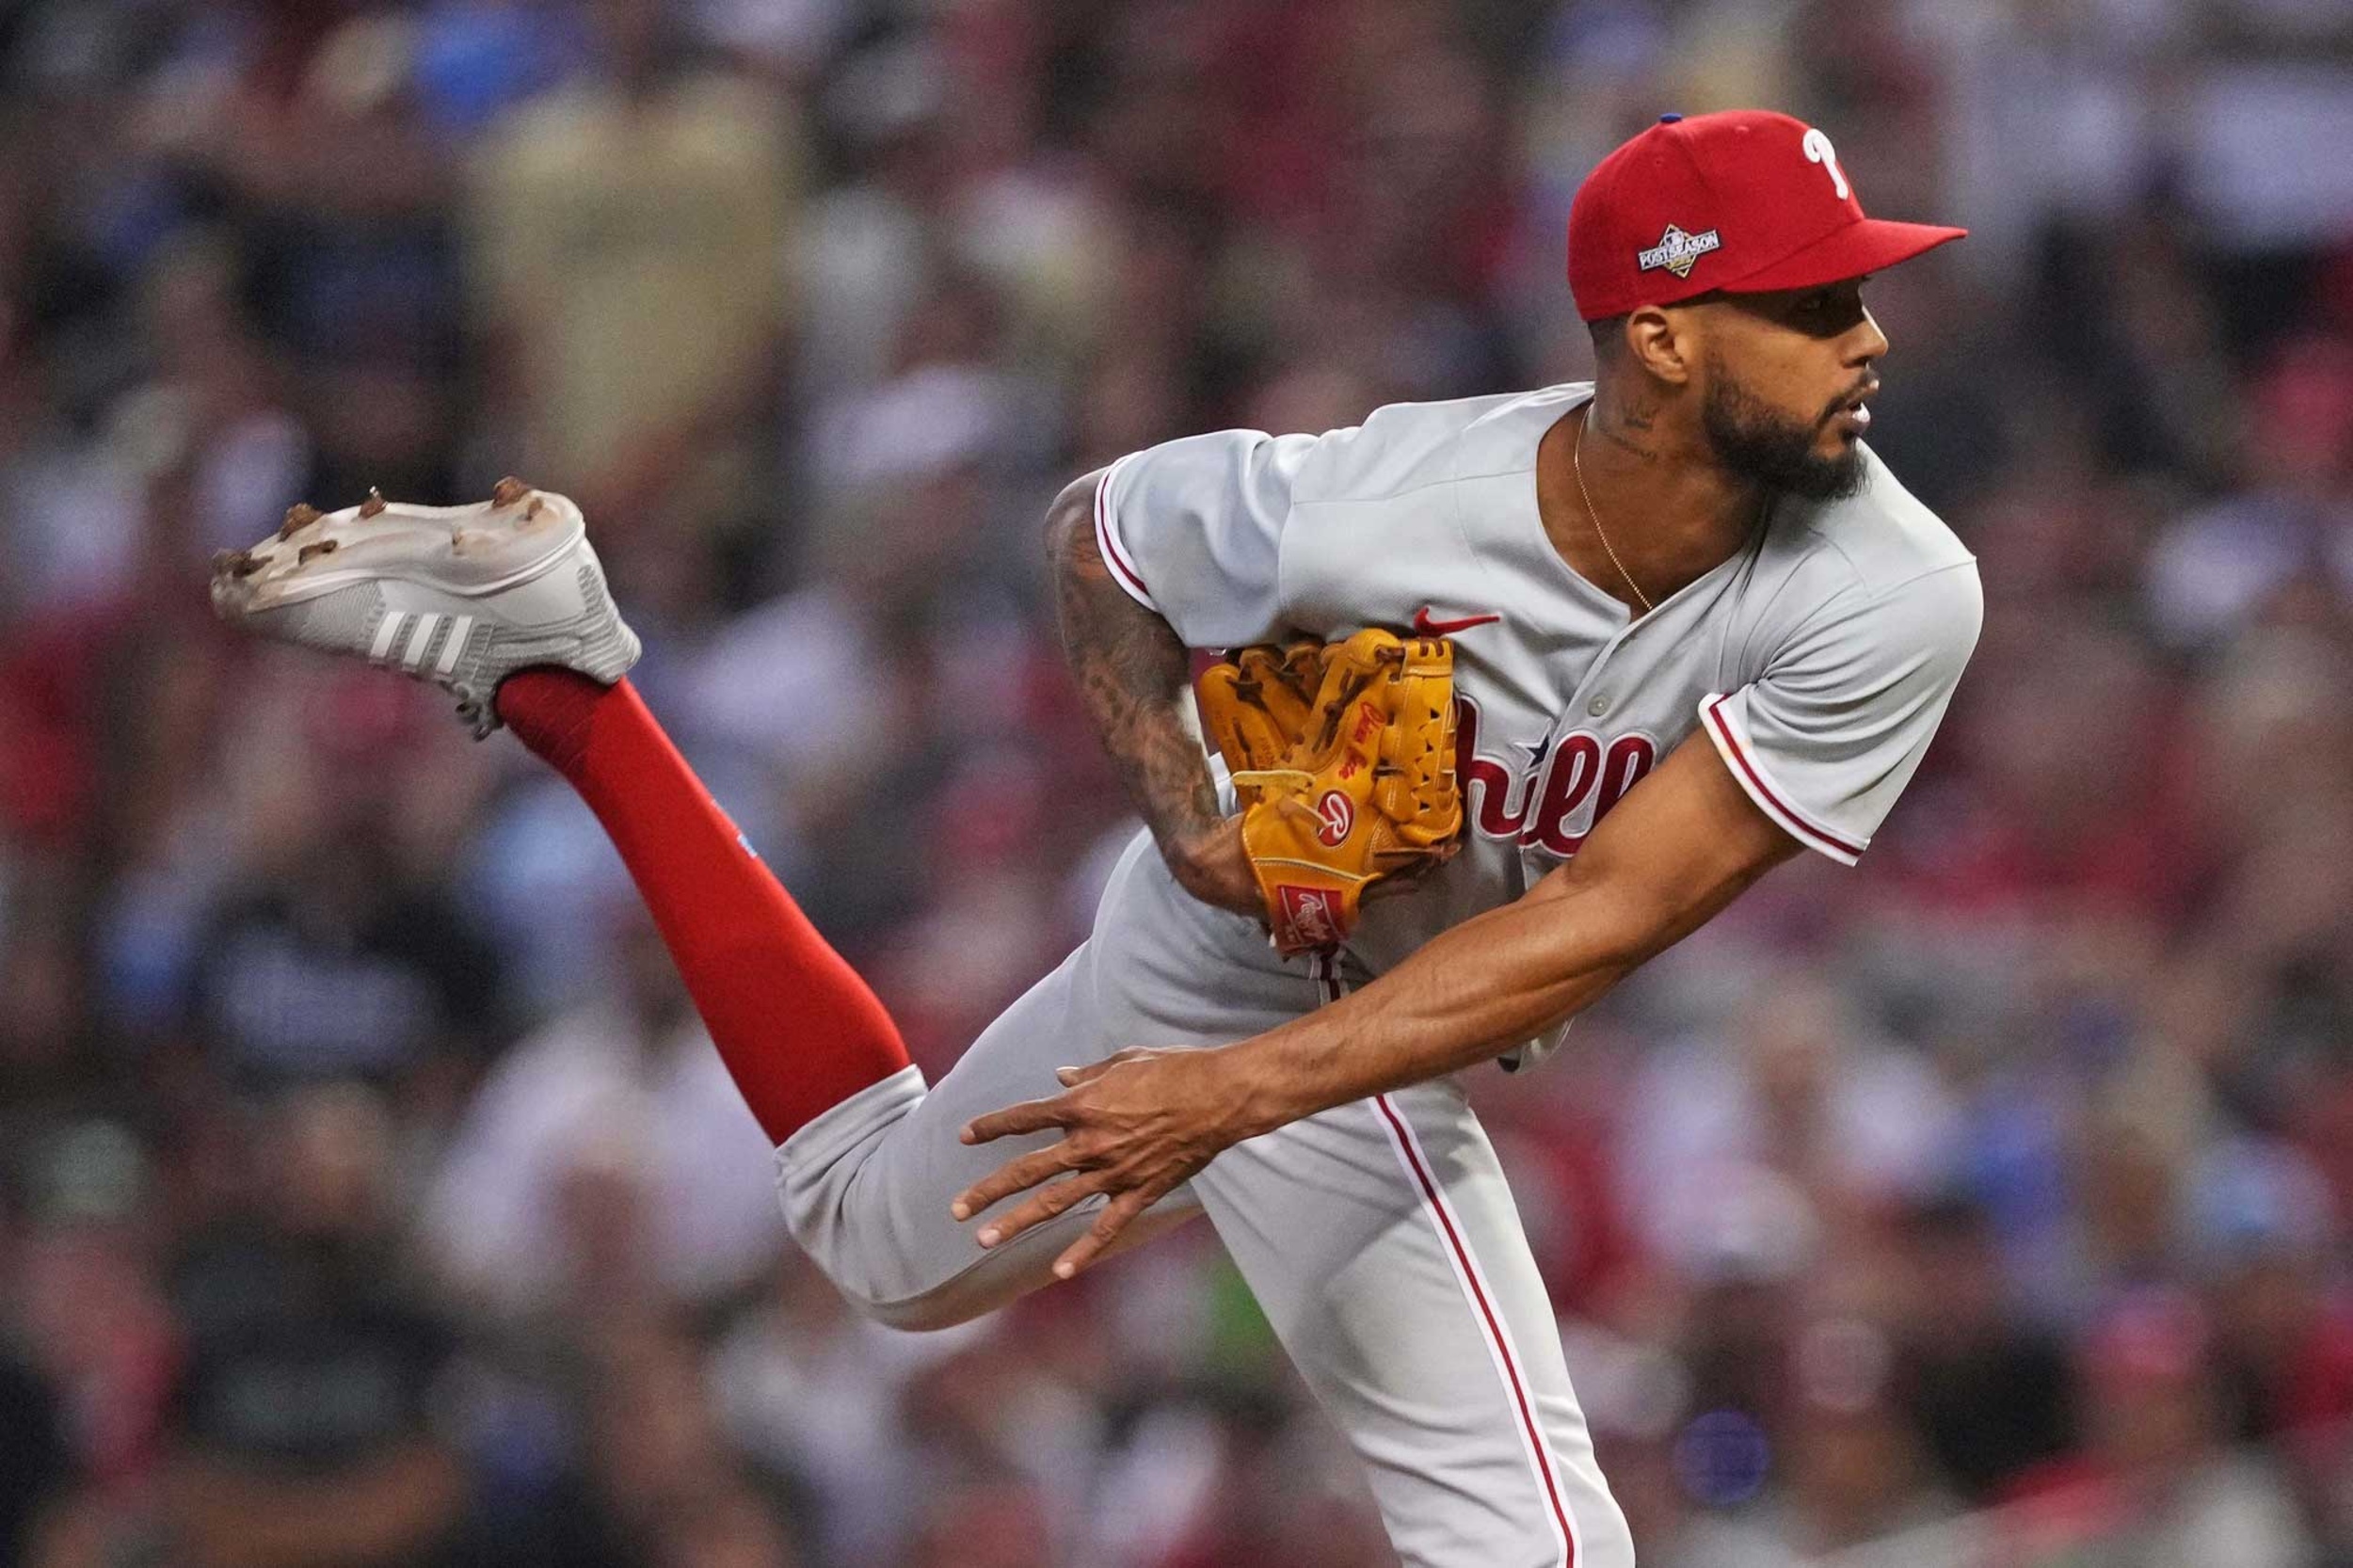 <p>Sanchez was a surprise rotation performer when the Phils needed him last season, posting a 3.44 ERA in 99.1 innings. The team will lean on Aaron Nola and Zack Wheeler again this season, but Sanchez's contribution could be just as important with the team competing with the talented Braves for the NL East.</p><p>You may also like: <a href='https://www.yardbarker.com/mlb/articles/the_best_player_ever_to_play_for_each_mlb_franchise_022824/s1__39111210'>The best player ever to play for each MLB franchise</a></p>